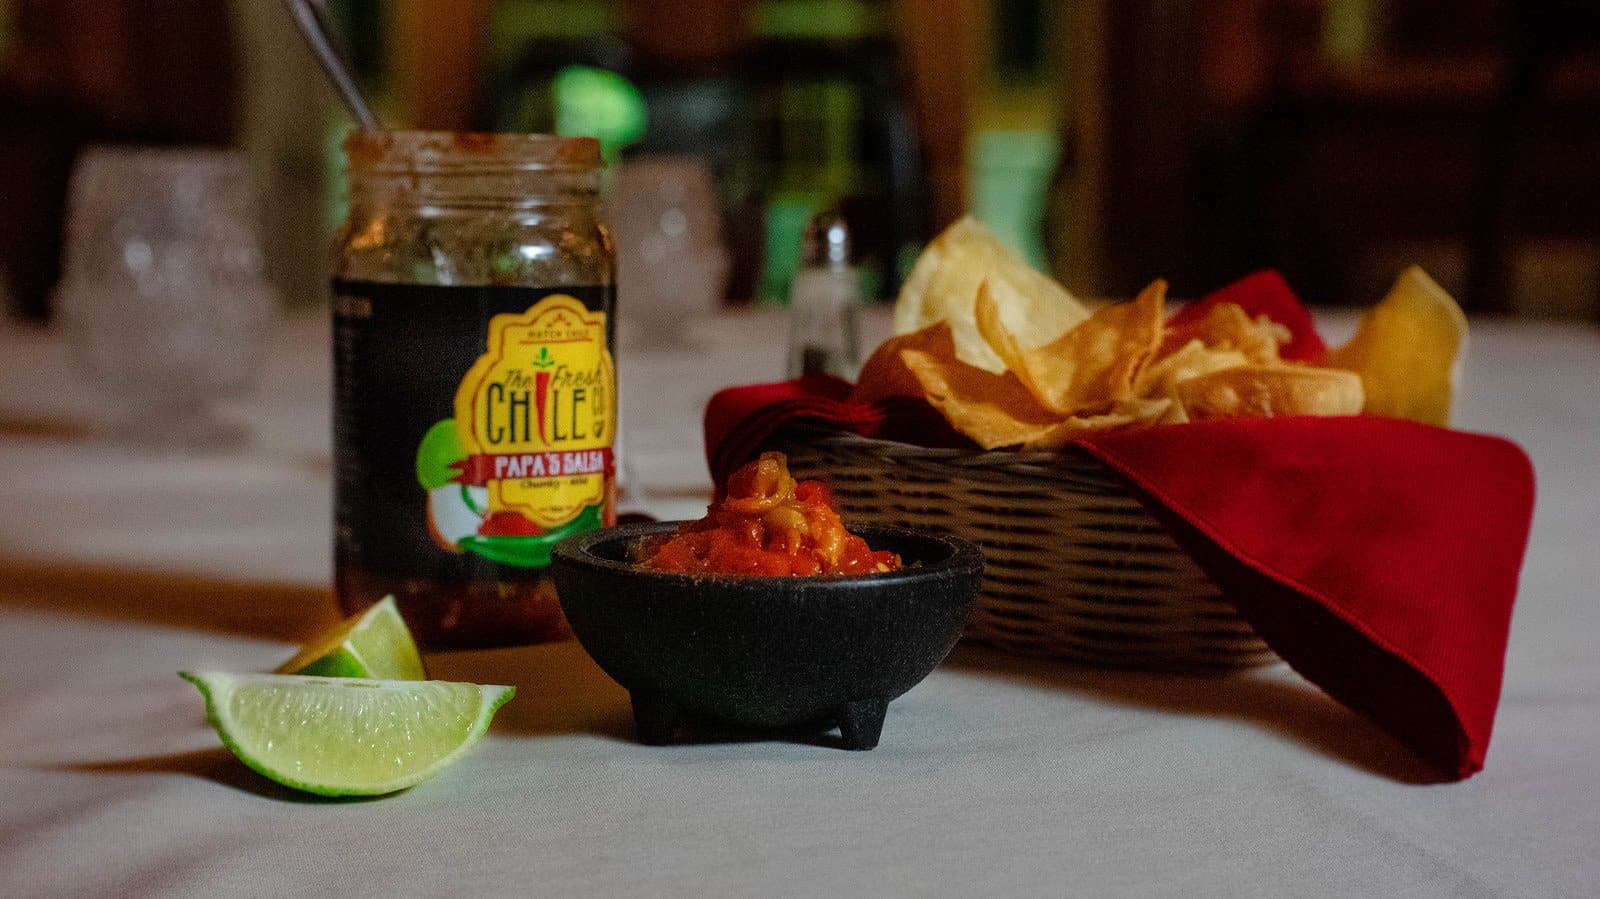 A small bowl of Fresh Chile Co's Mama's Blended Hatch Chile Salsa next to a basket of tortilla chips, with a lime wedge and a jar labeled "chiles" on a dimly lit table